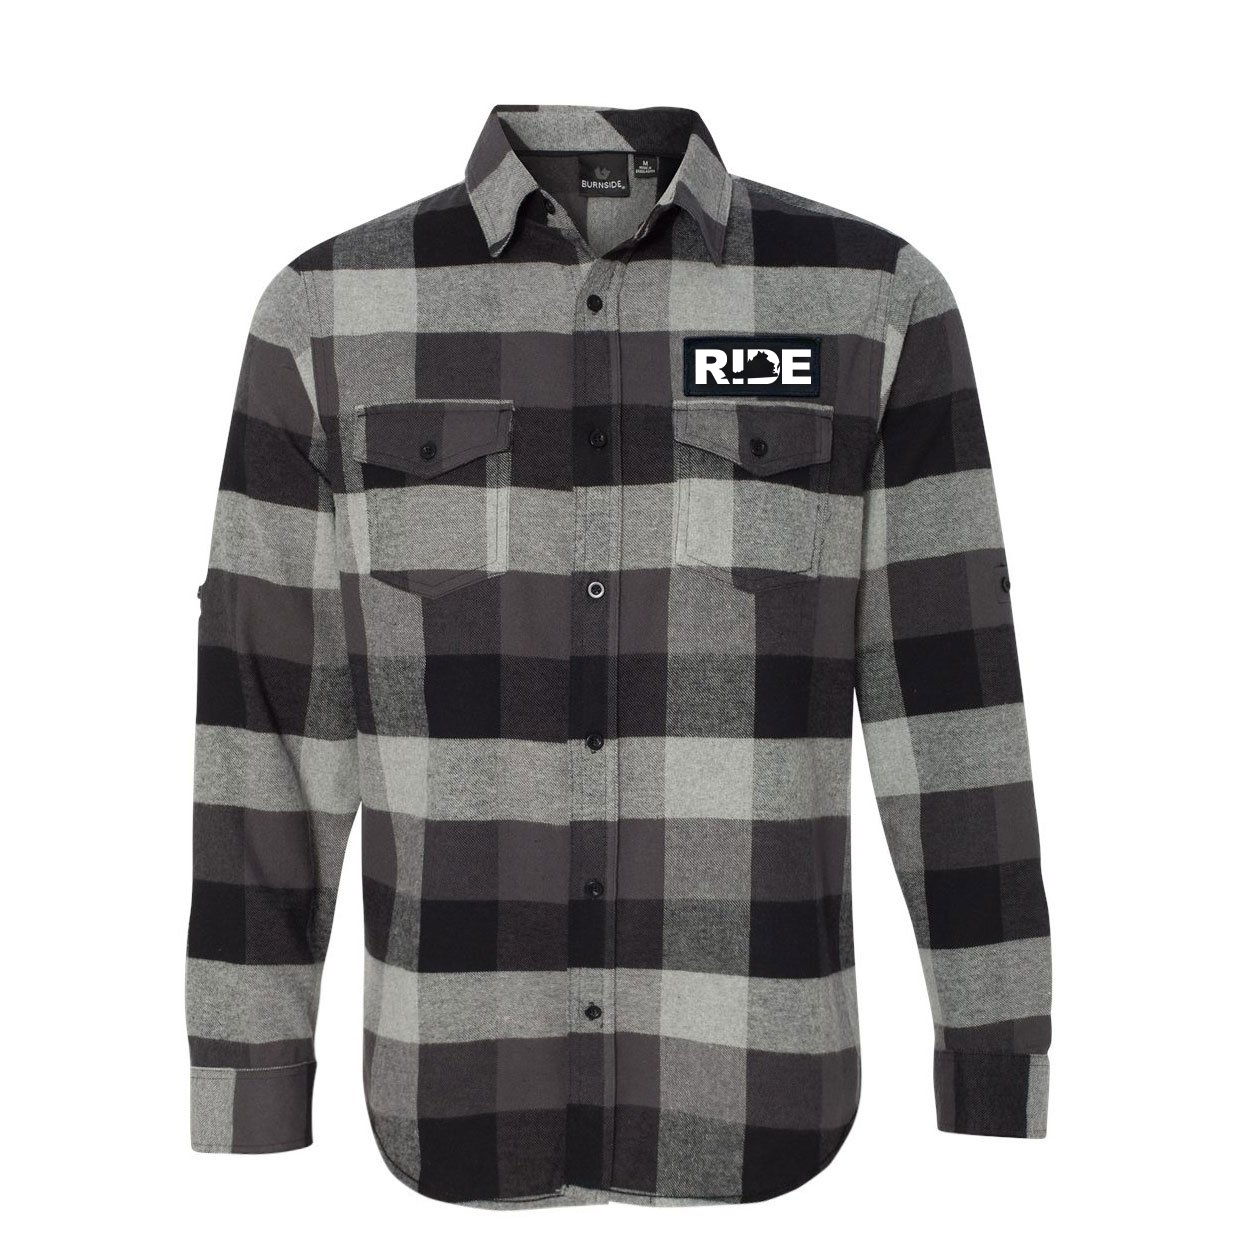 Ride Virginia Classic Unisex Long Sleeve Woven Patch Flannel Shirt Black/Gray (White Logo)